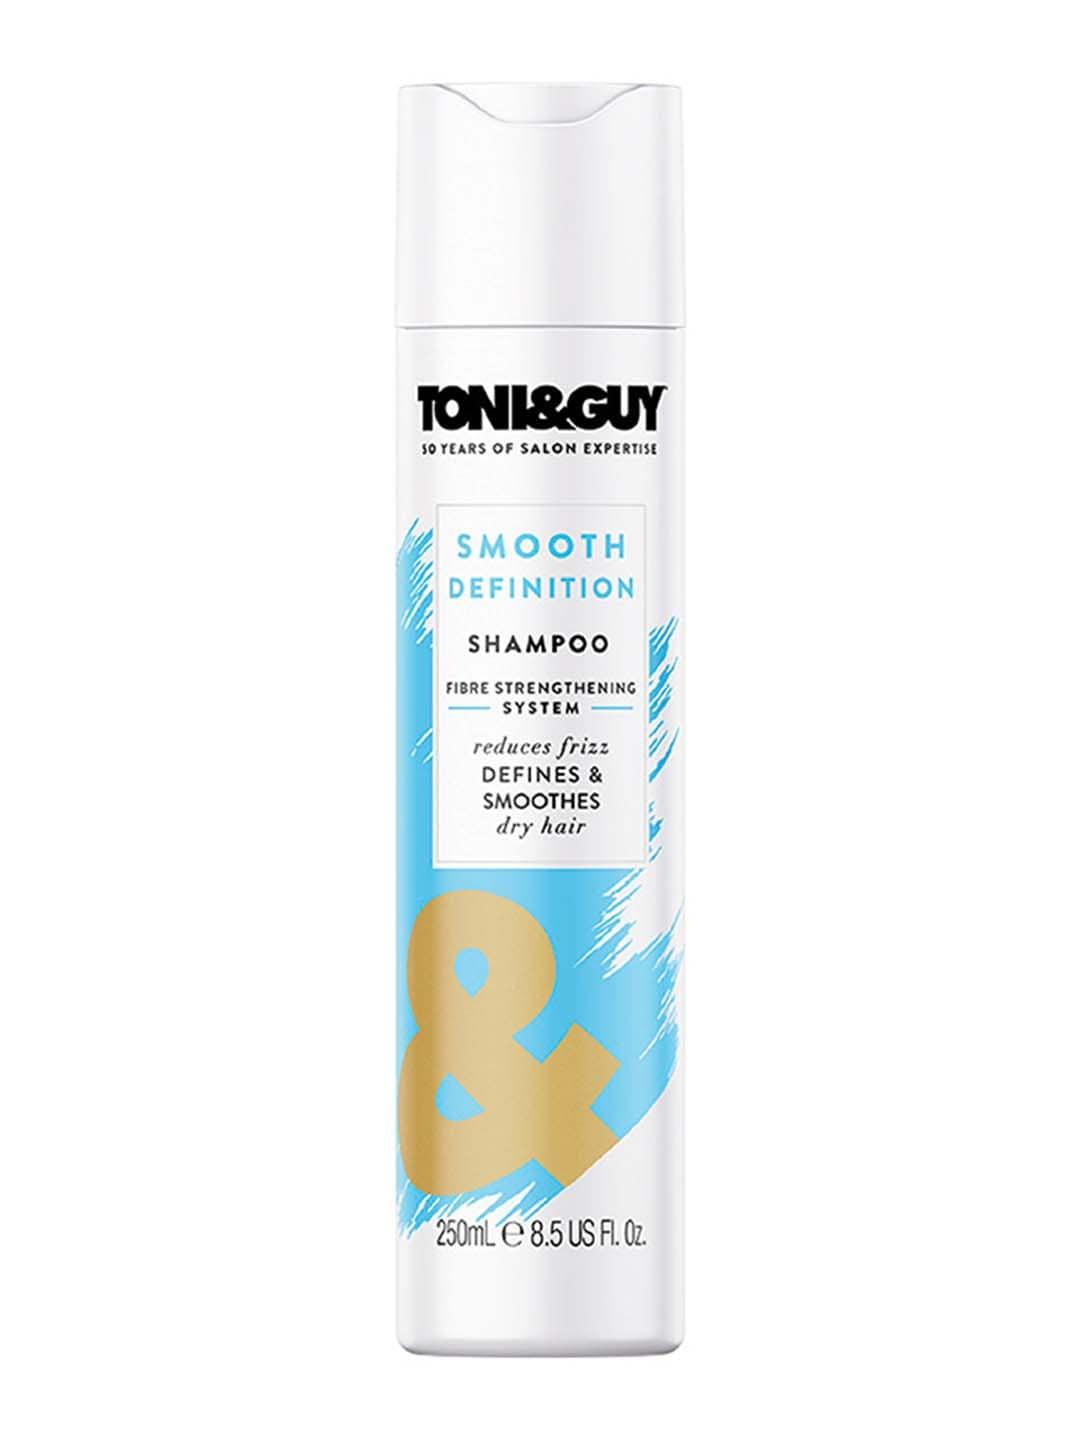 TONI & GUY Smooth Definition Shampoo for Dry Frizzy Hair - 250ml